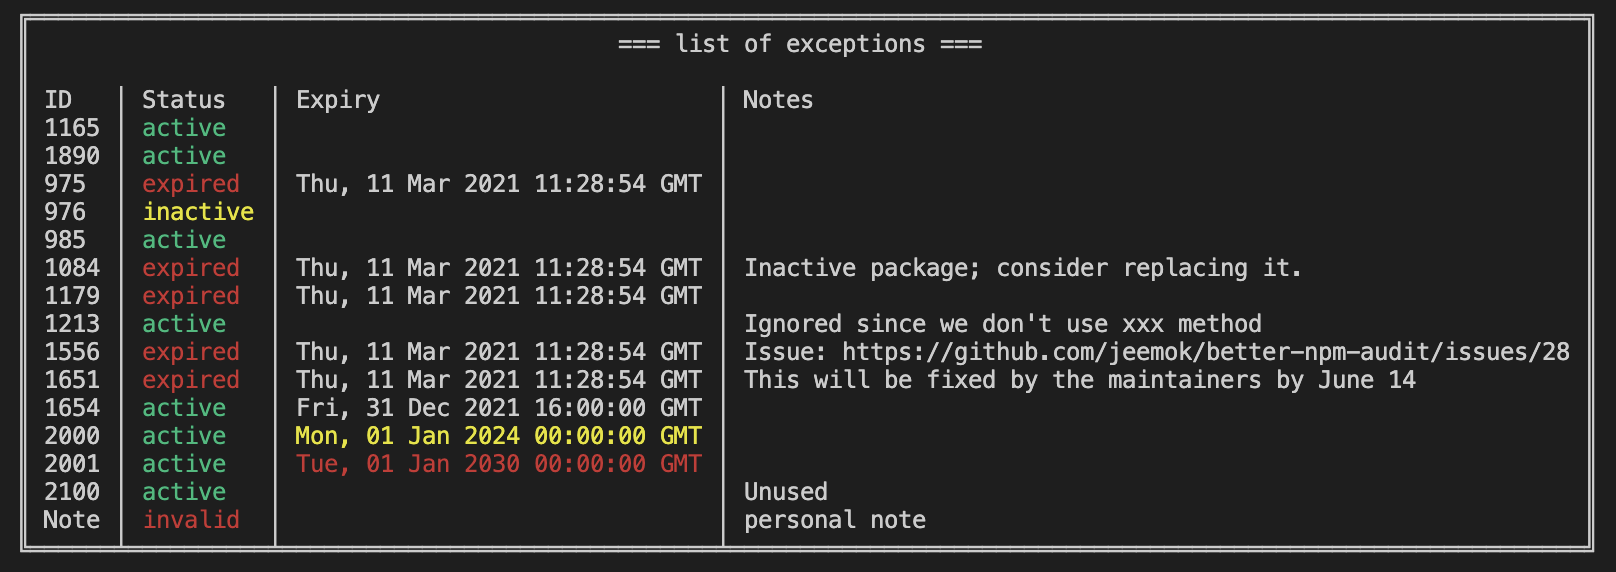 Demo of table displaying a list of exceptions